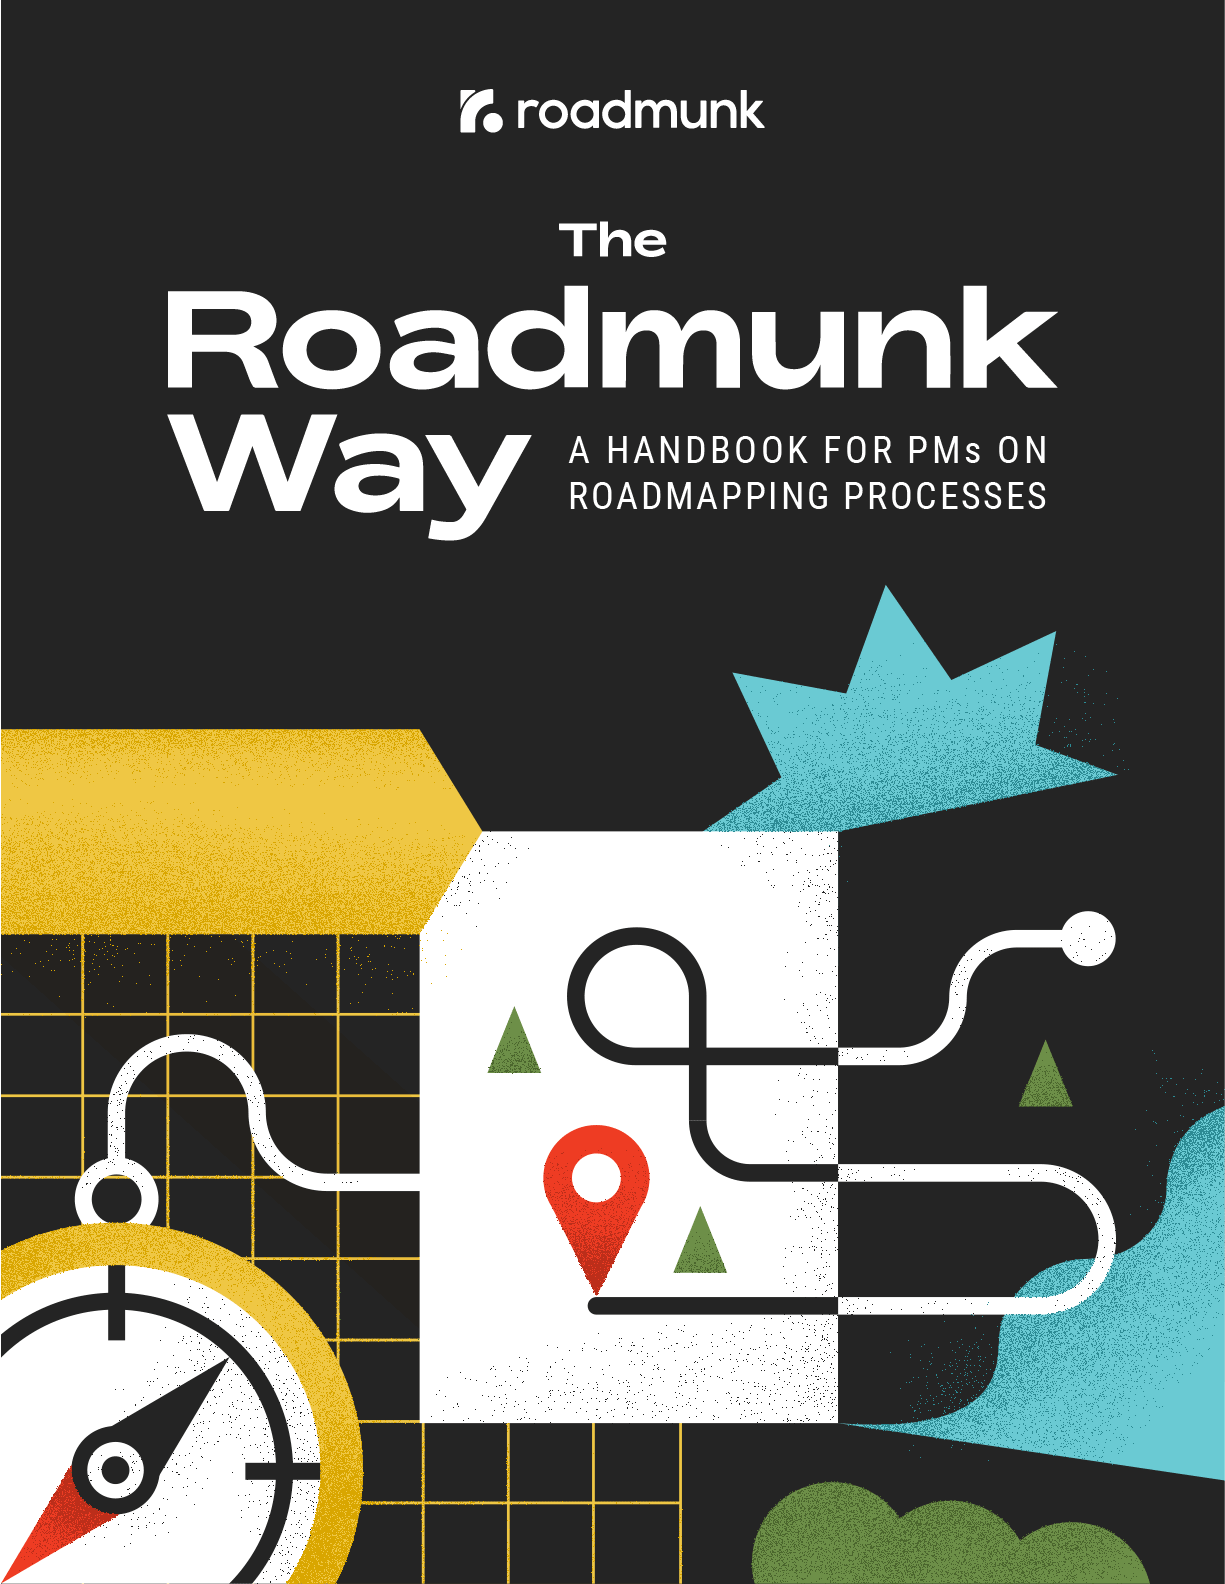 The Roadmunk Way. A handbook for Product Managers on roadmapping processes.